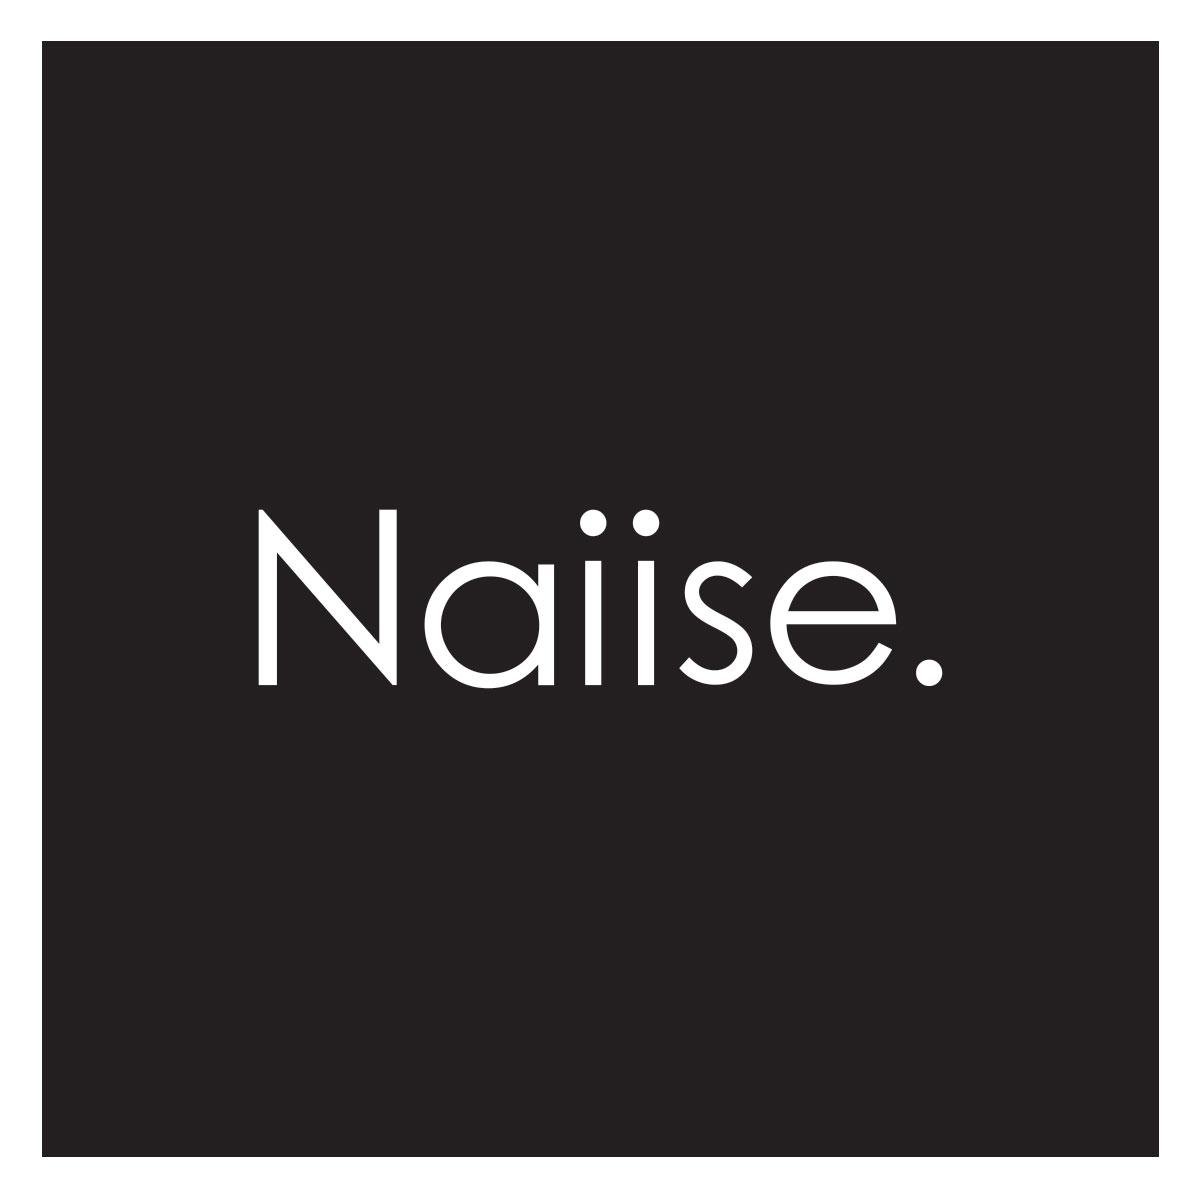 Naiise is design for everyone, for everyday.